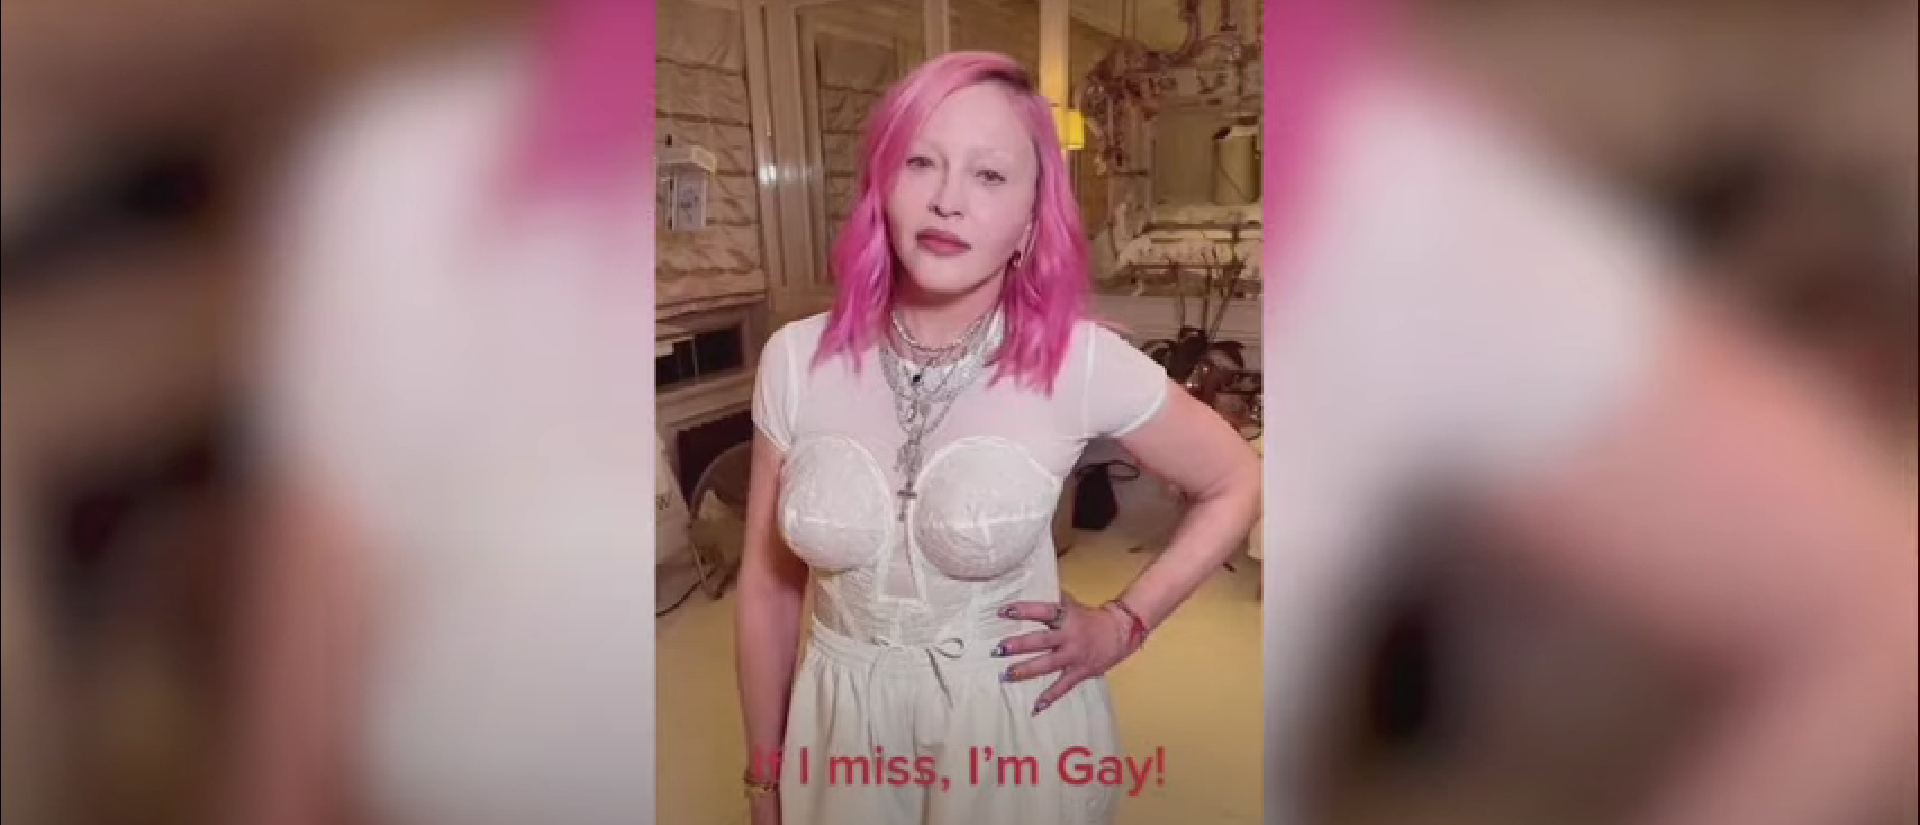 Madonna’s Latest Reinvention Of Herself Is … Coming Out As Gay?